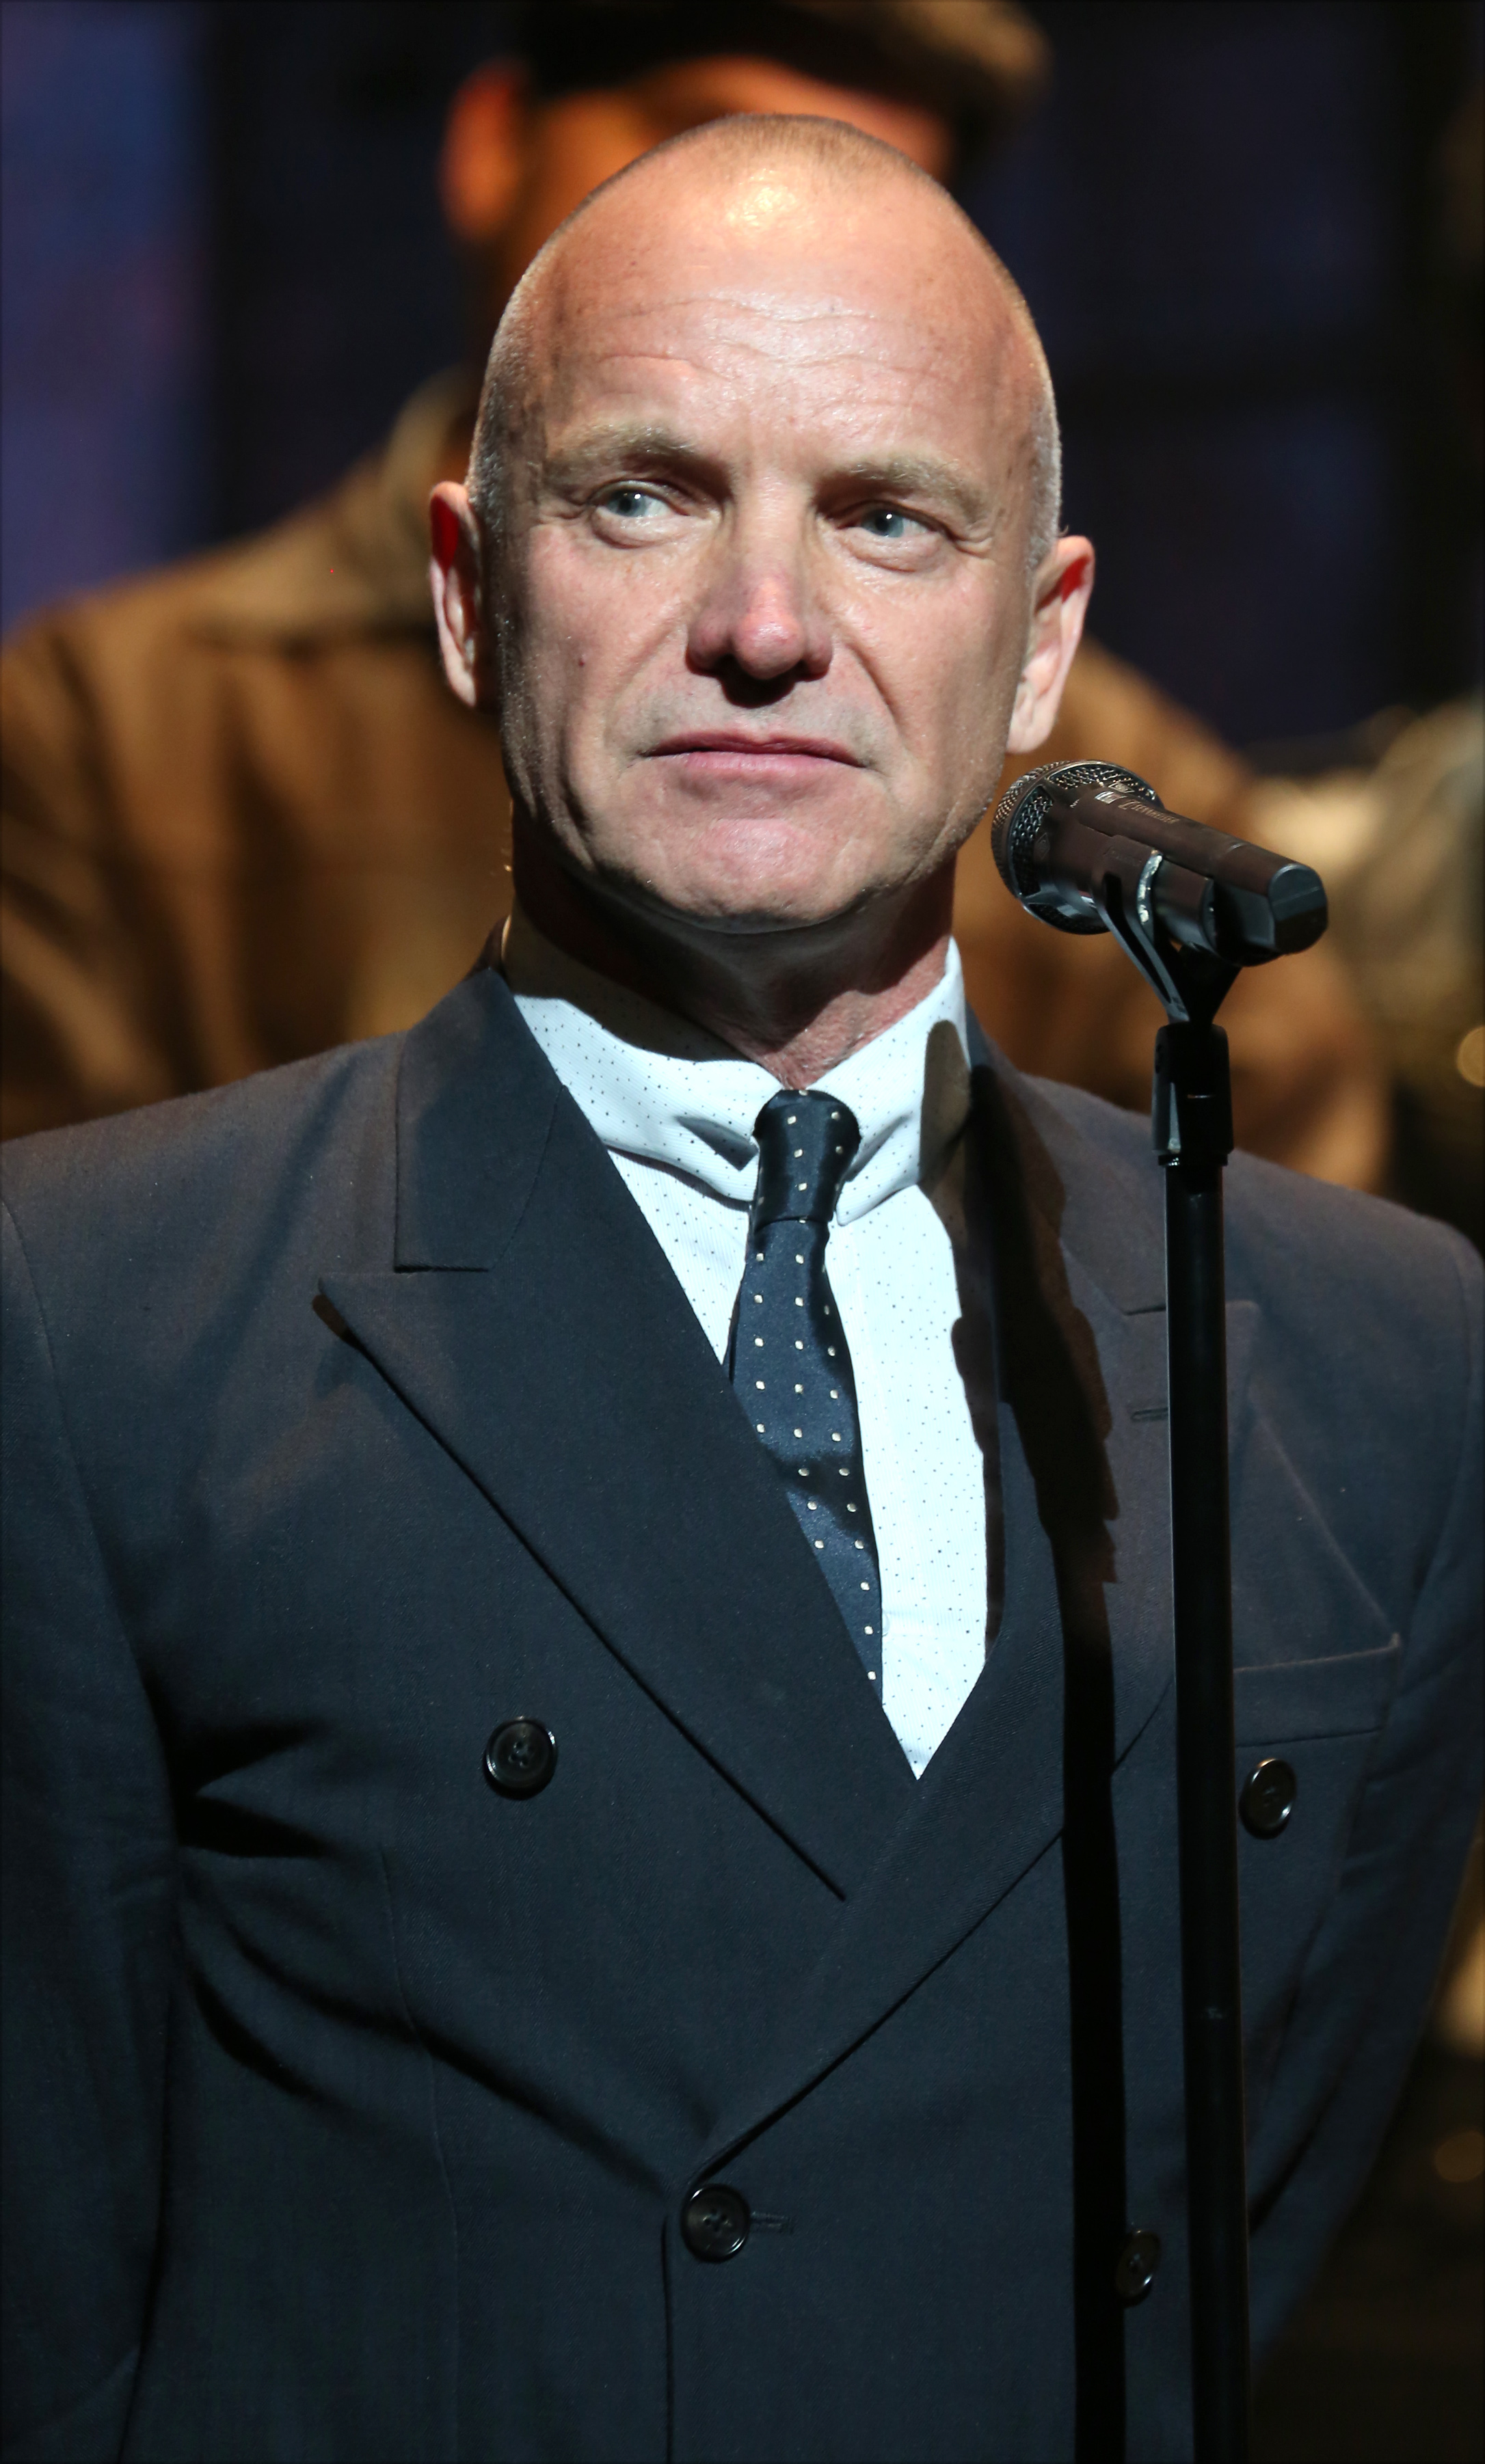 Sting performs during the Broadway Opening Night Performance Curtain Call for 'The Last Ship' at the Neil Simon Theatre on Oct. 26, 2014 in New York City. (Walter McBride—WireImage)